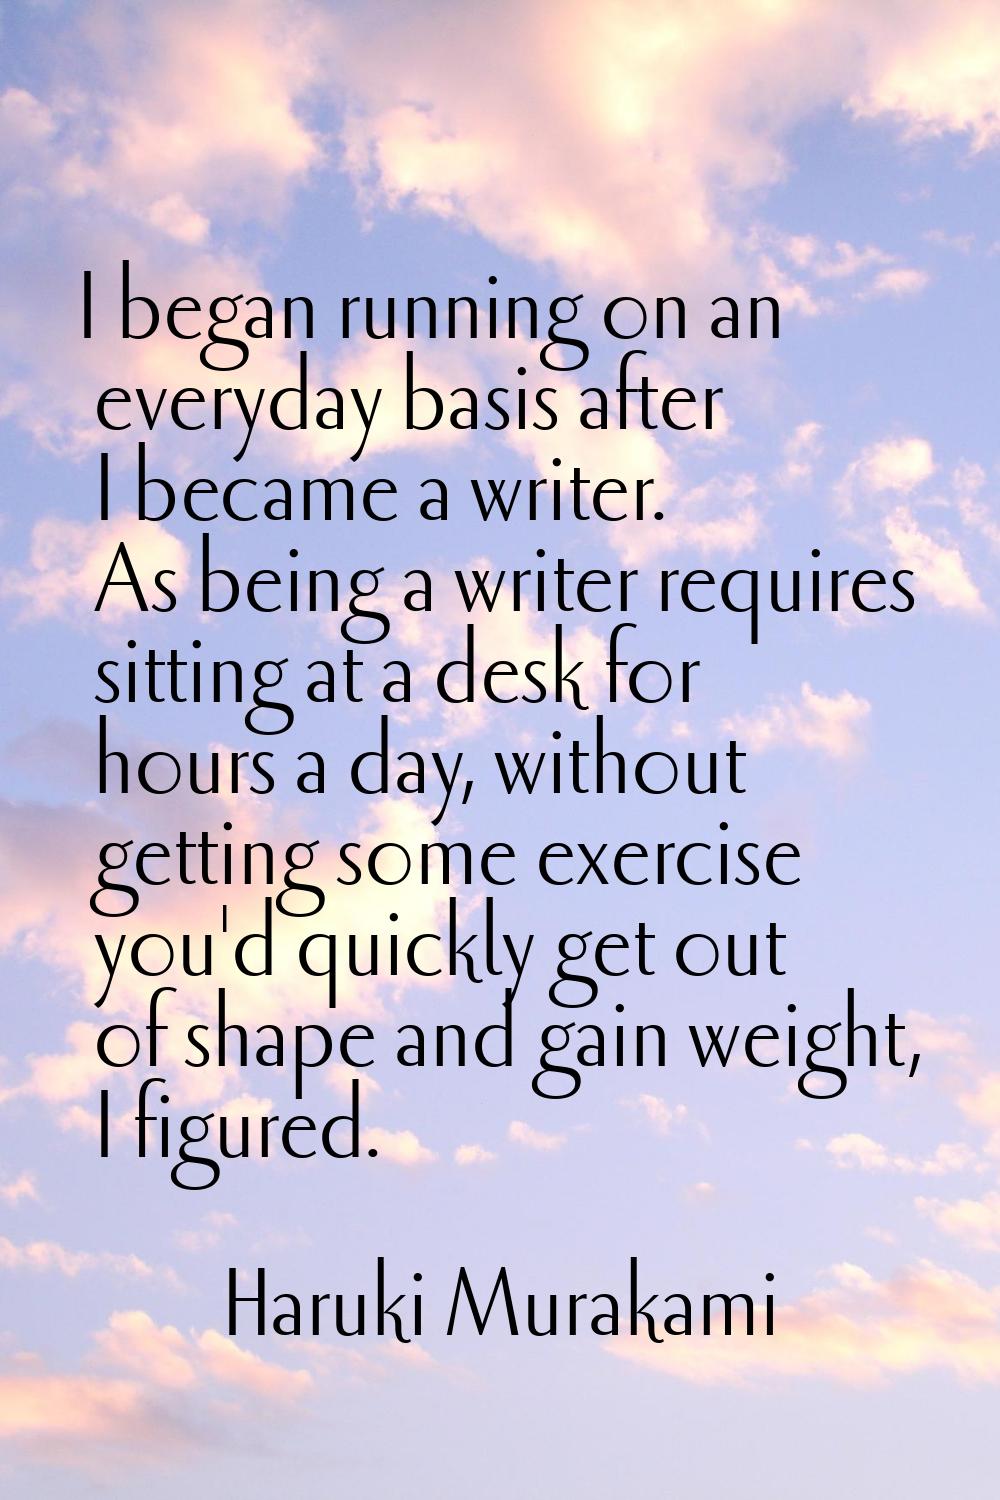 I began running on an everyday basis after I became a writer. As being a writer requires sitting at